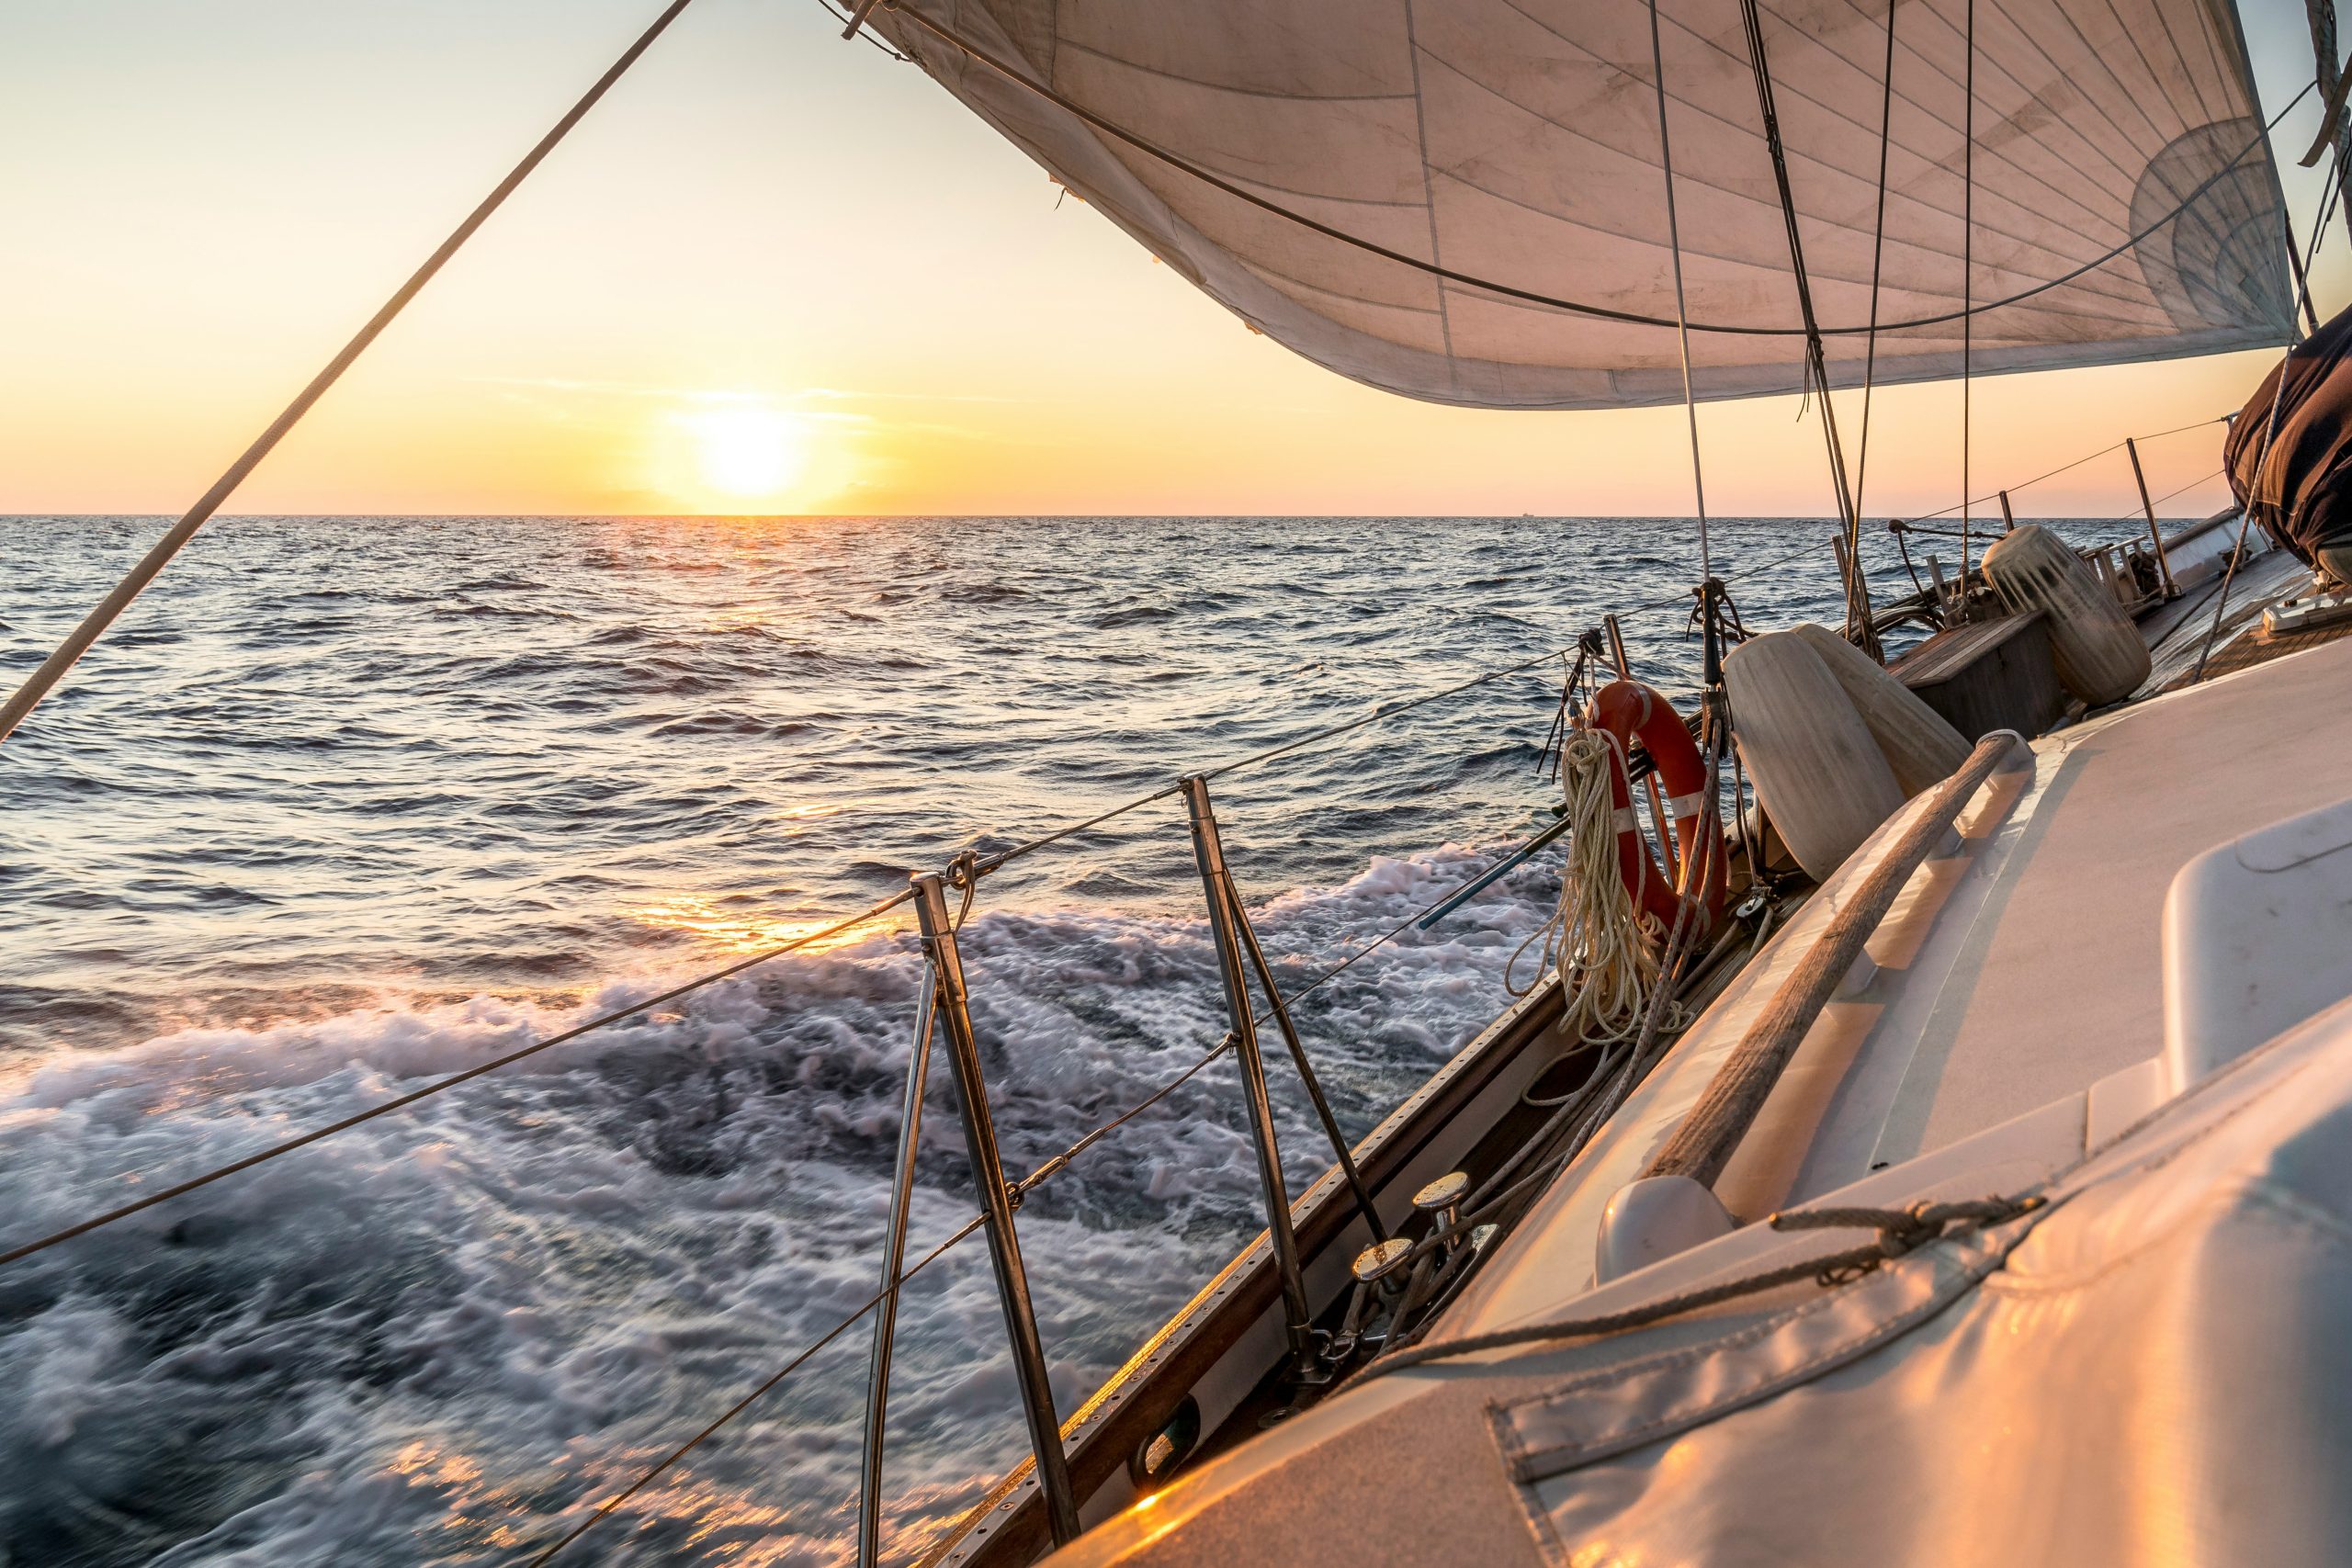 sailing - explore the seas and experience the freedom of open waters with our sailing adventures. join us for a thrilling journey and create unforgettable memories.